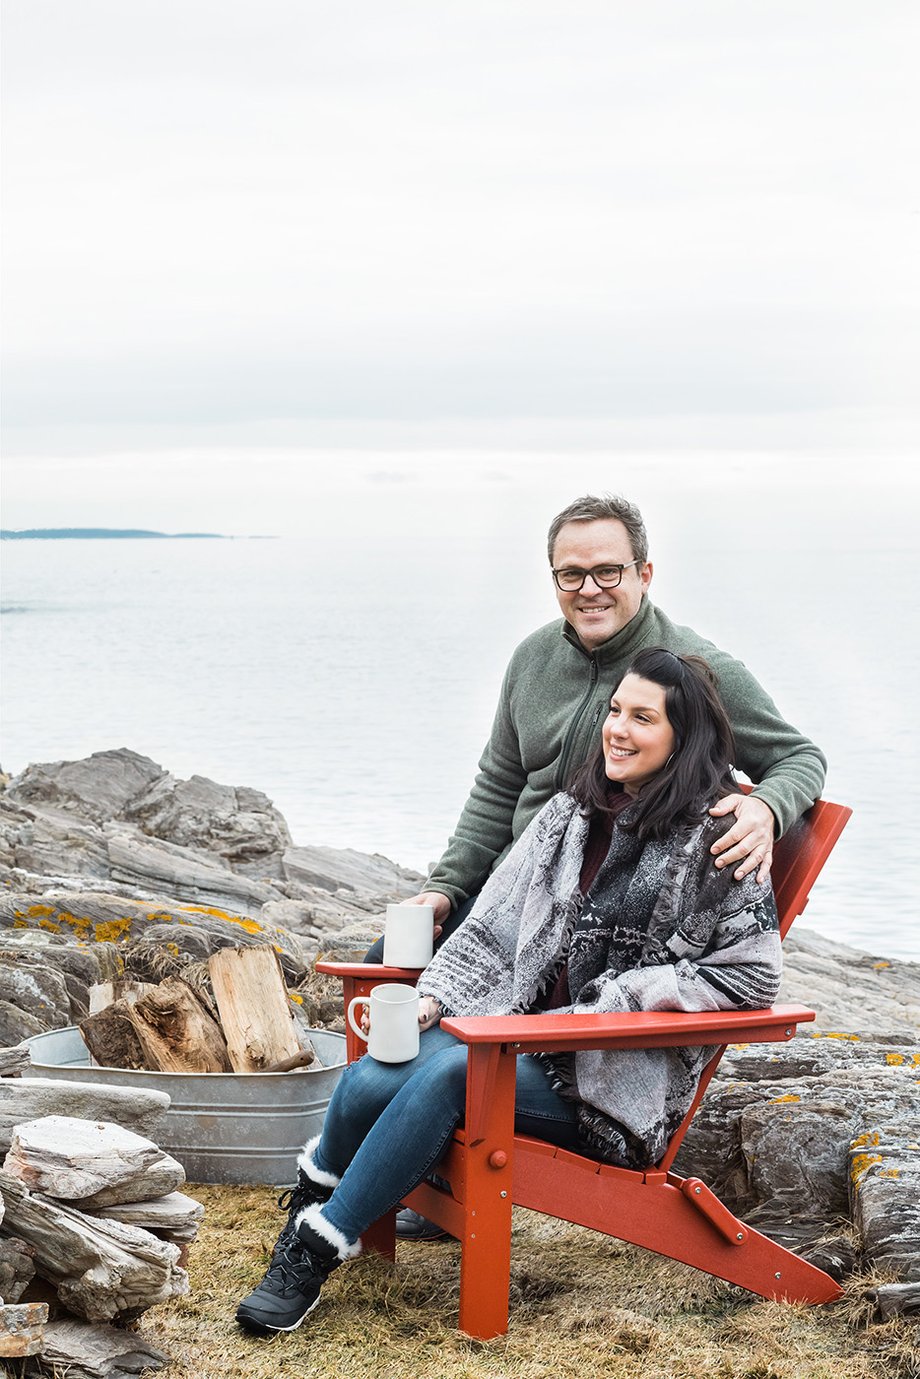 Tanya Lacourse and husband near their coastal home in Maine shot by Joyelle West for Country Home Magazine